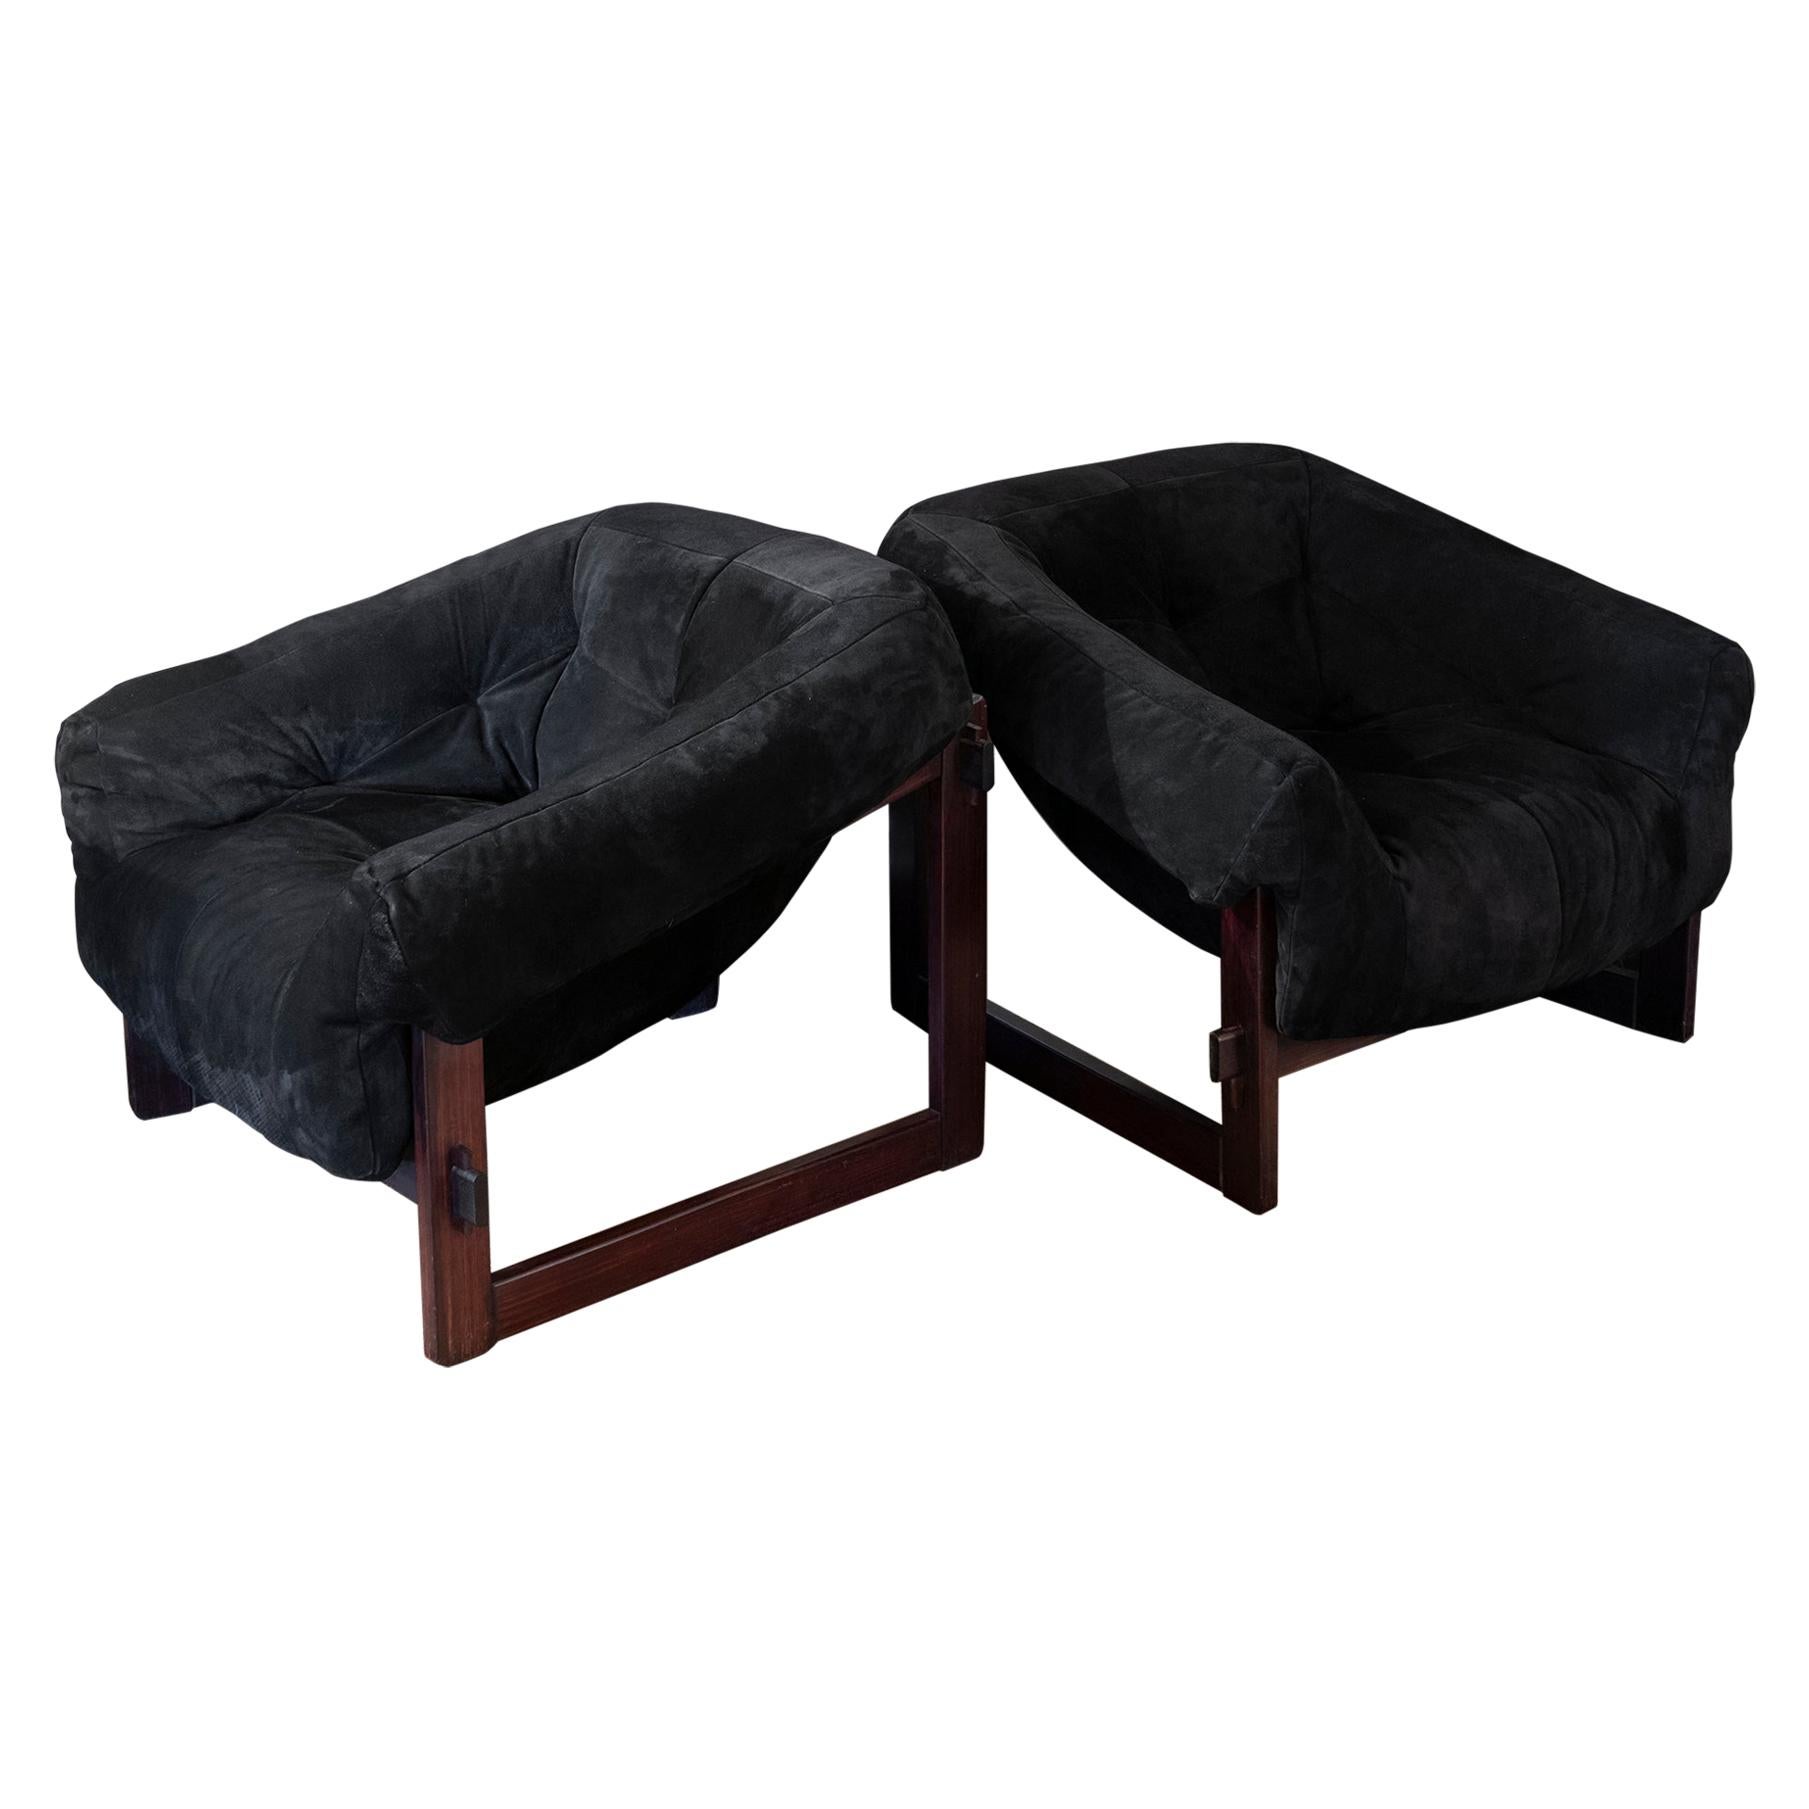 Pair of MP-091 Wood and Black Leather Lounge Chairs by Percival Lafer